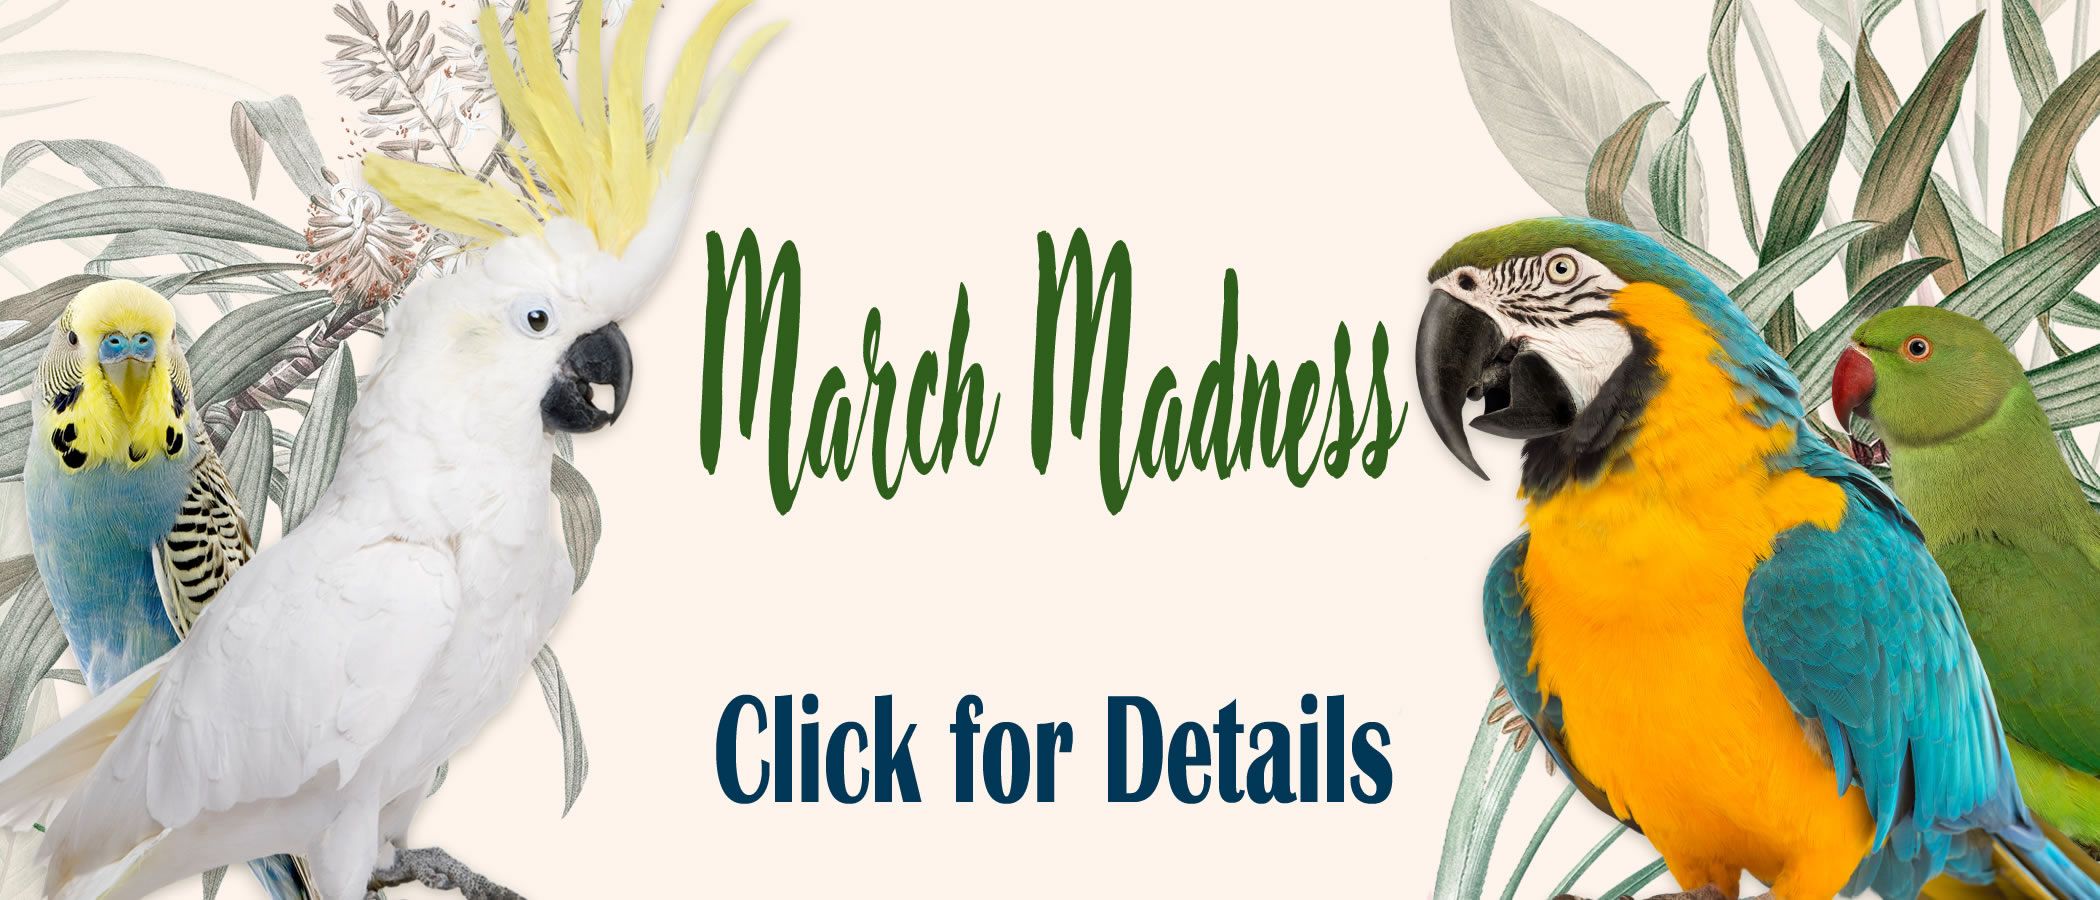 march_madness_new_site_r1_c1.jpg